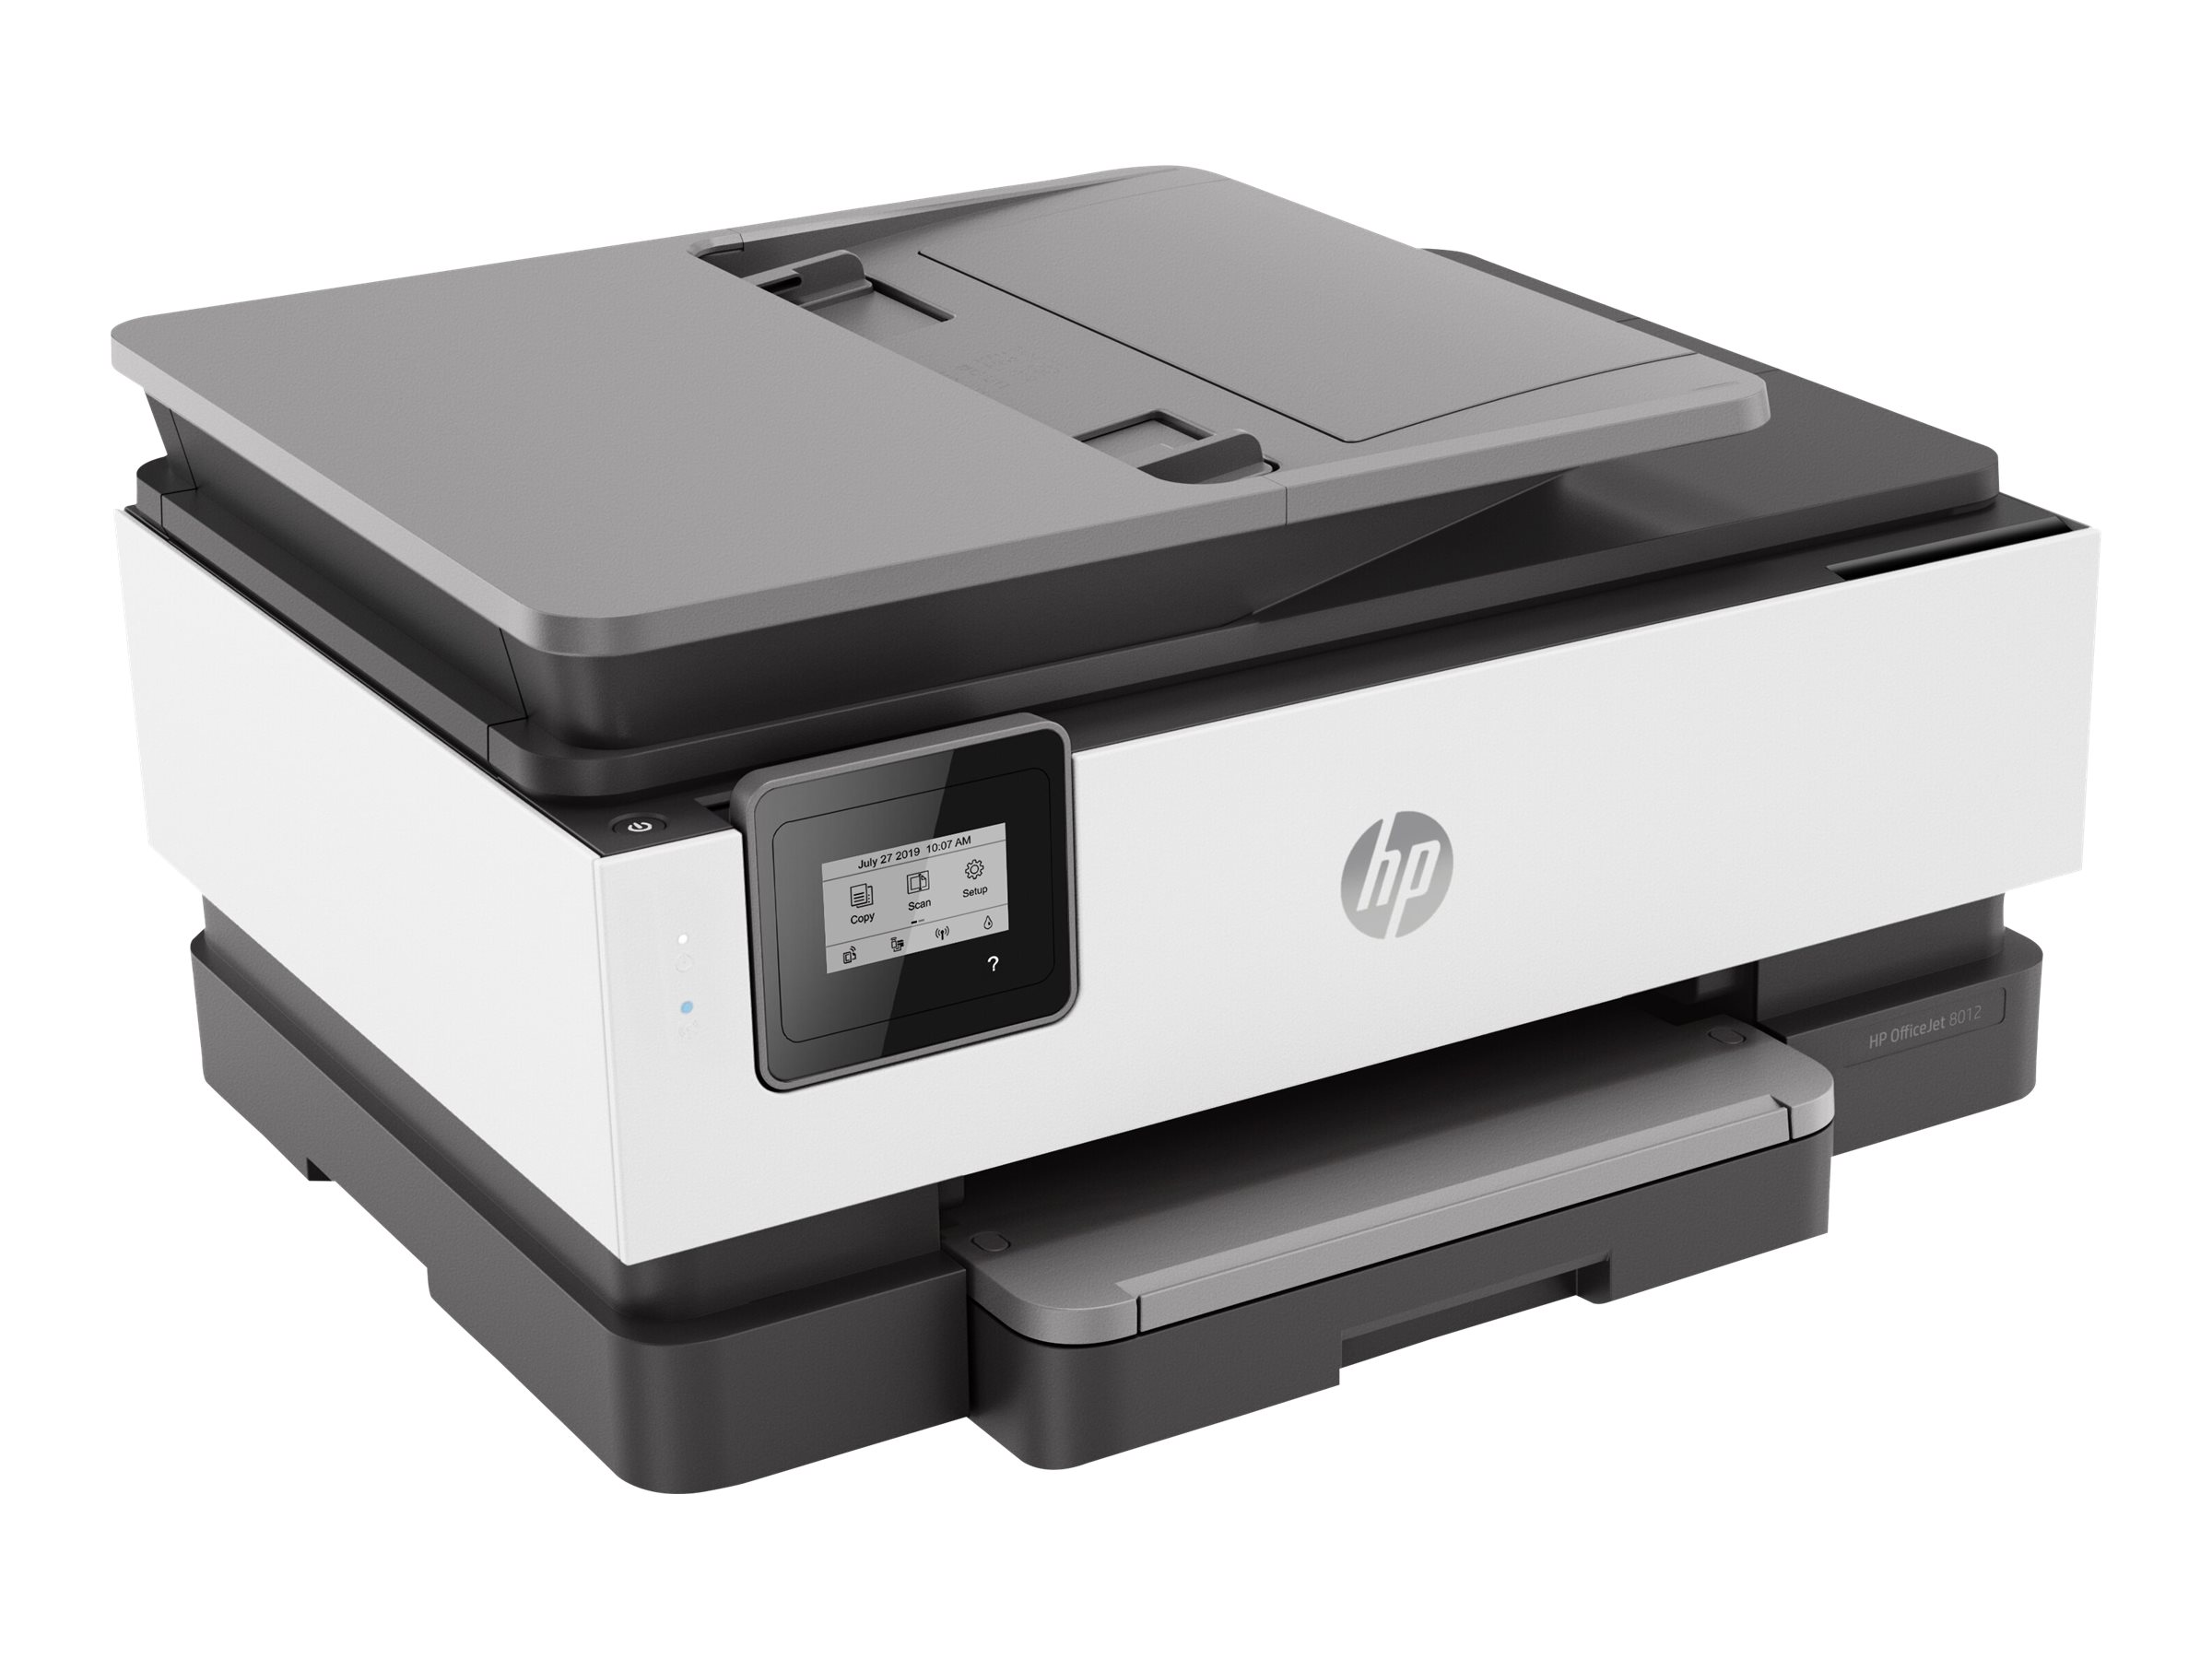 HP Officejet 8012 All-in-One - Multifunktionsdrucker - Farbe - Tintenstrahl - A4 (210 x 297 mm)